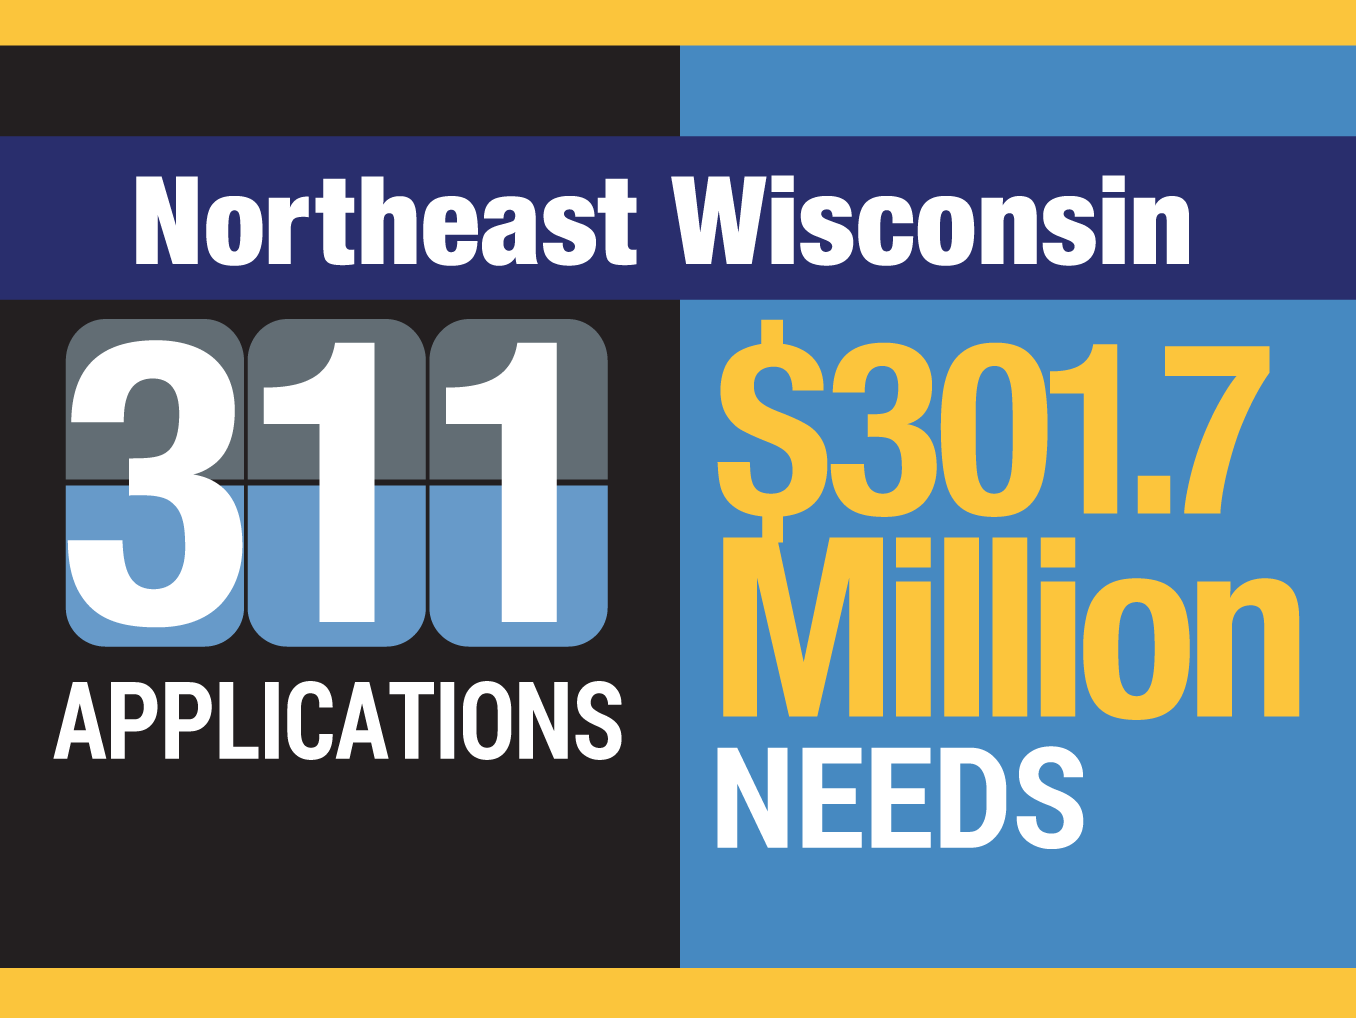 75 Million Local Grant Program, More Than 300 Million Reported Needs